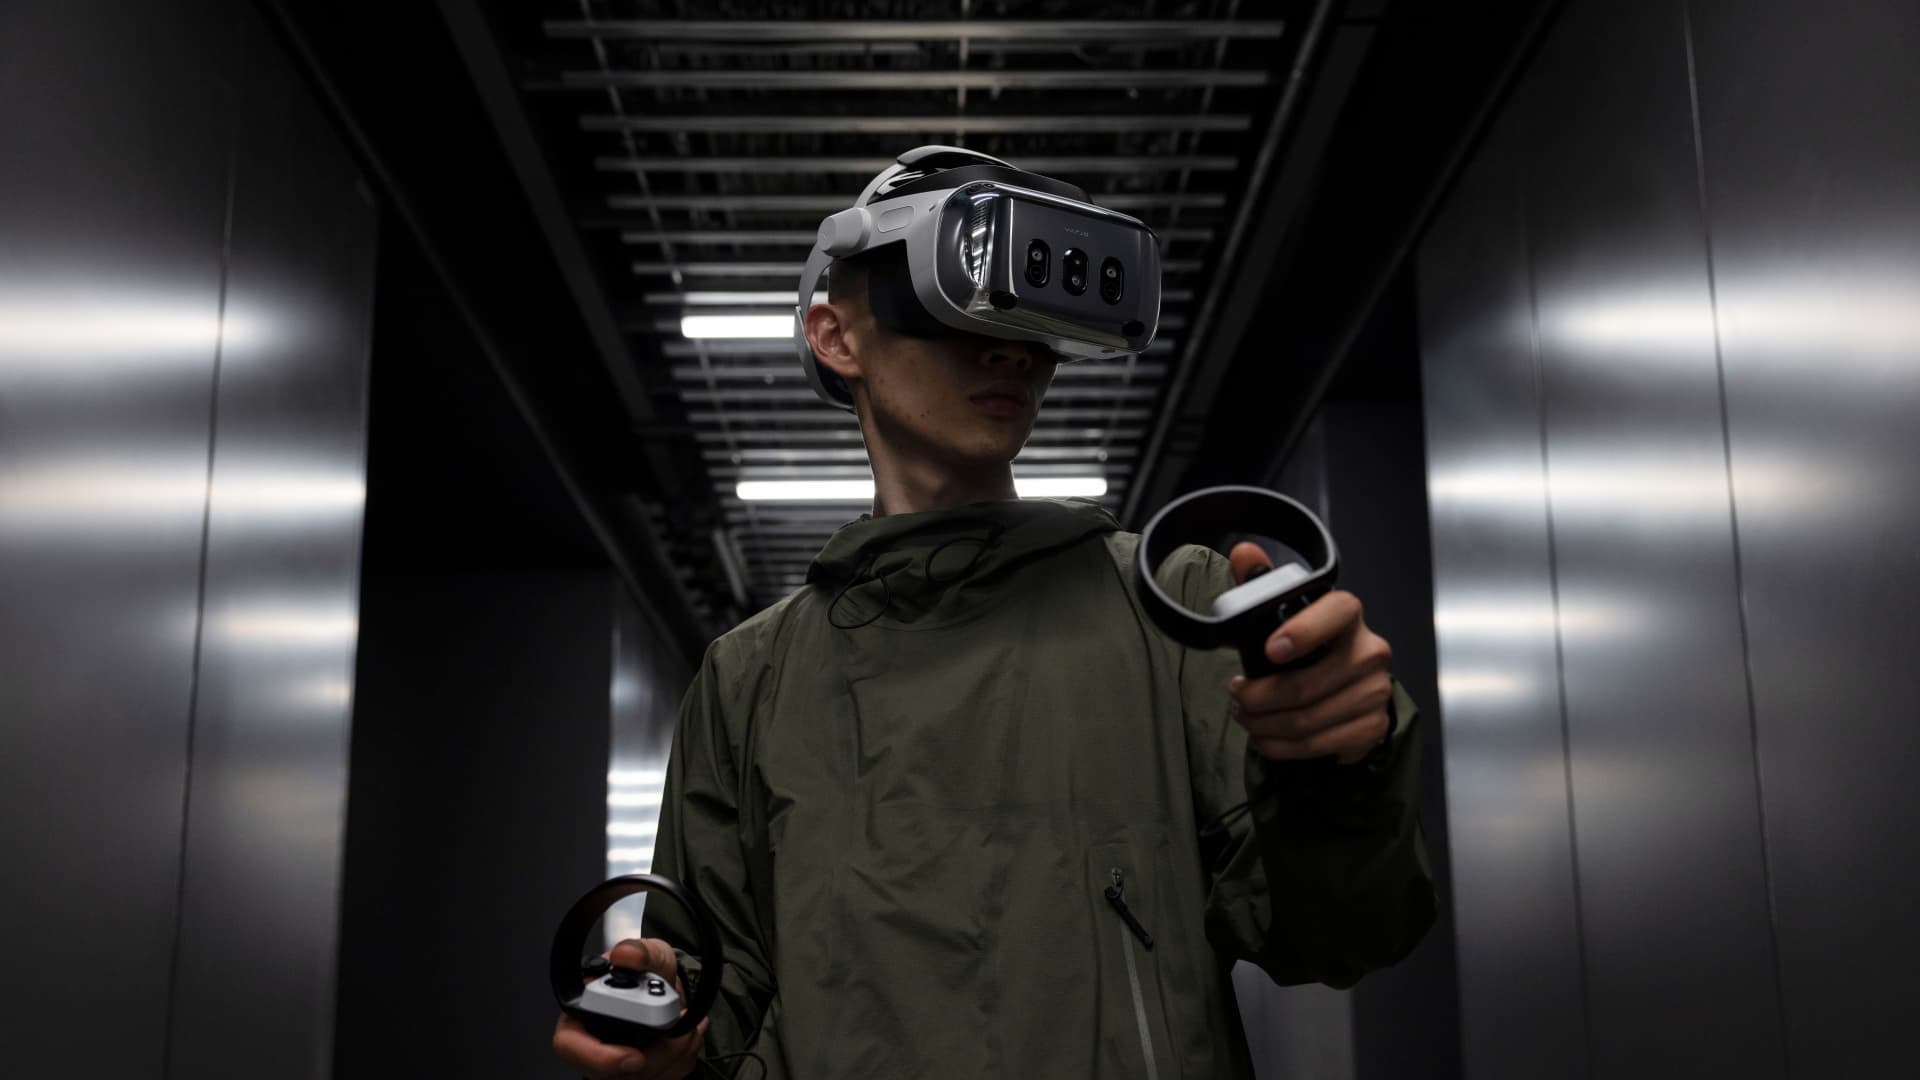 Finnish startup Varjo launches new $3,990 mixed-reality headset to take on Apple, Microsoft